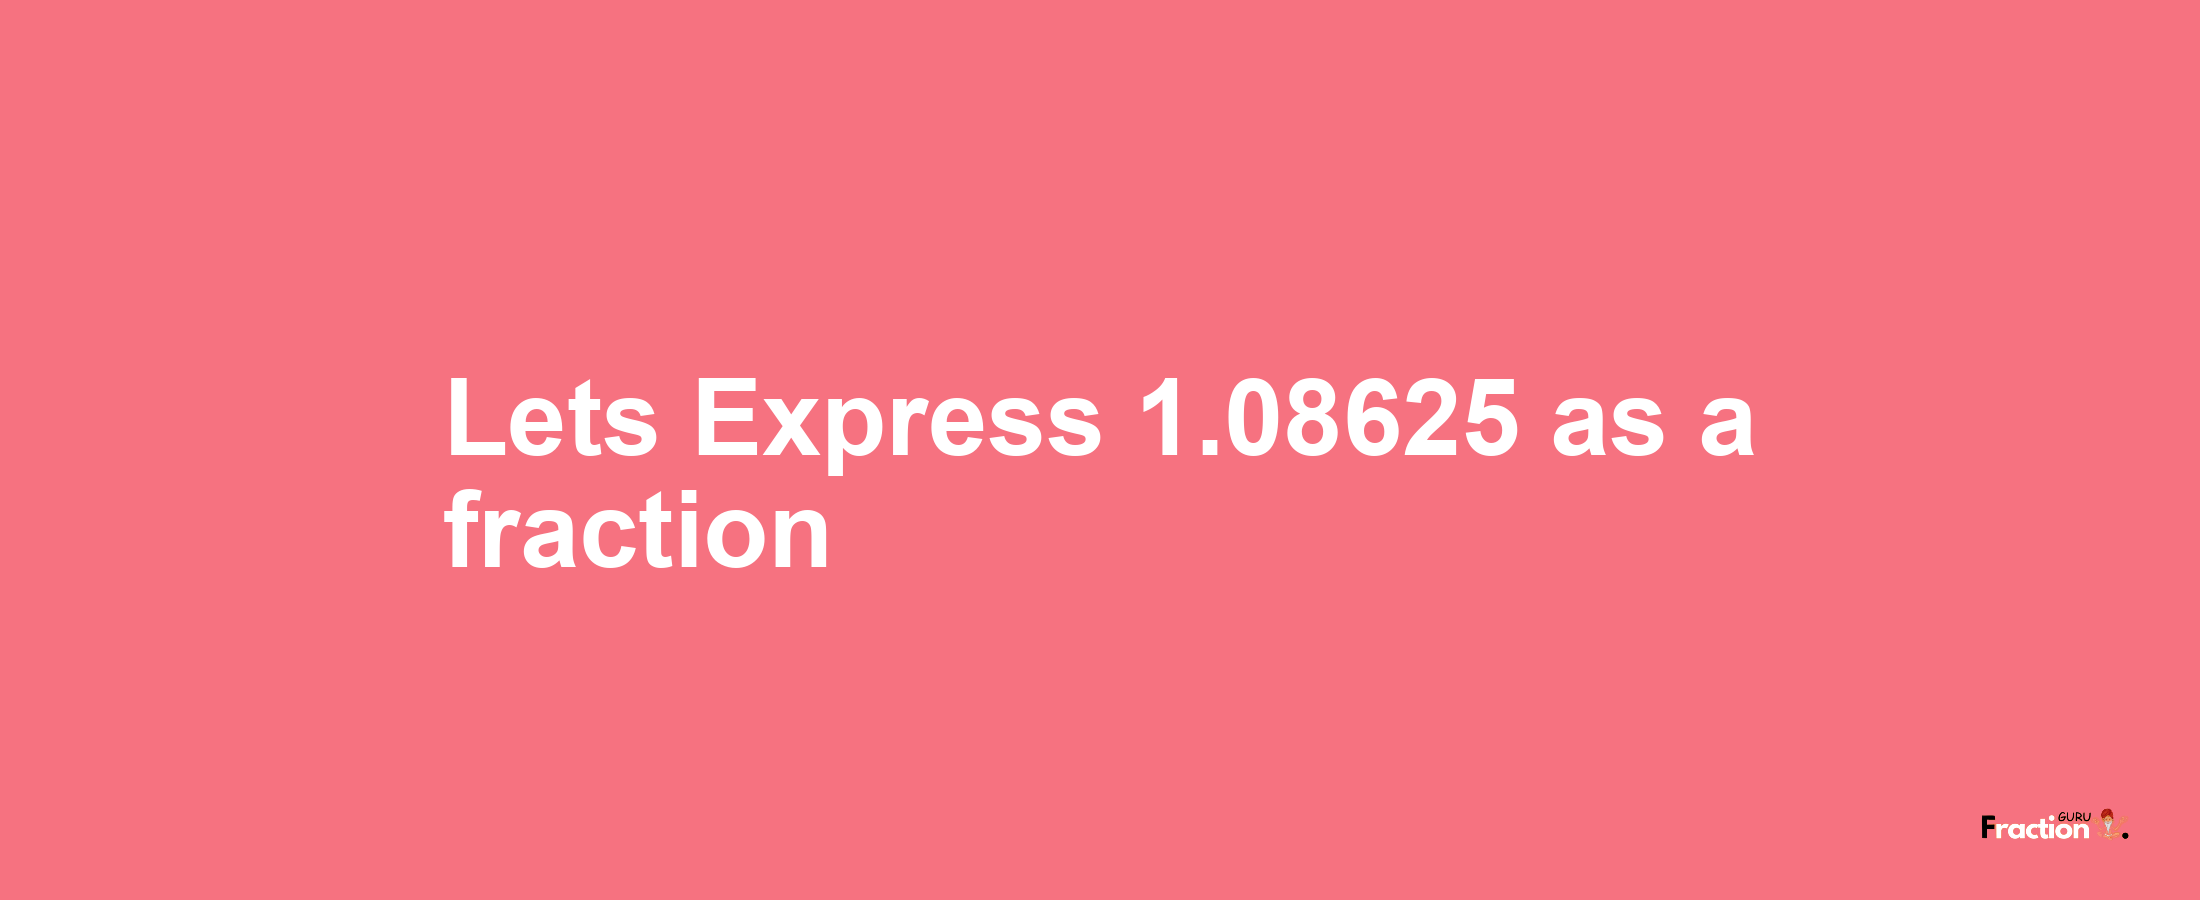 Lets Express 1.08625 as afraction